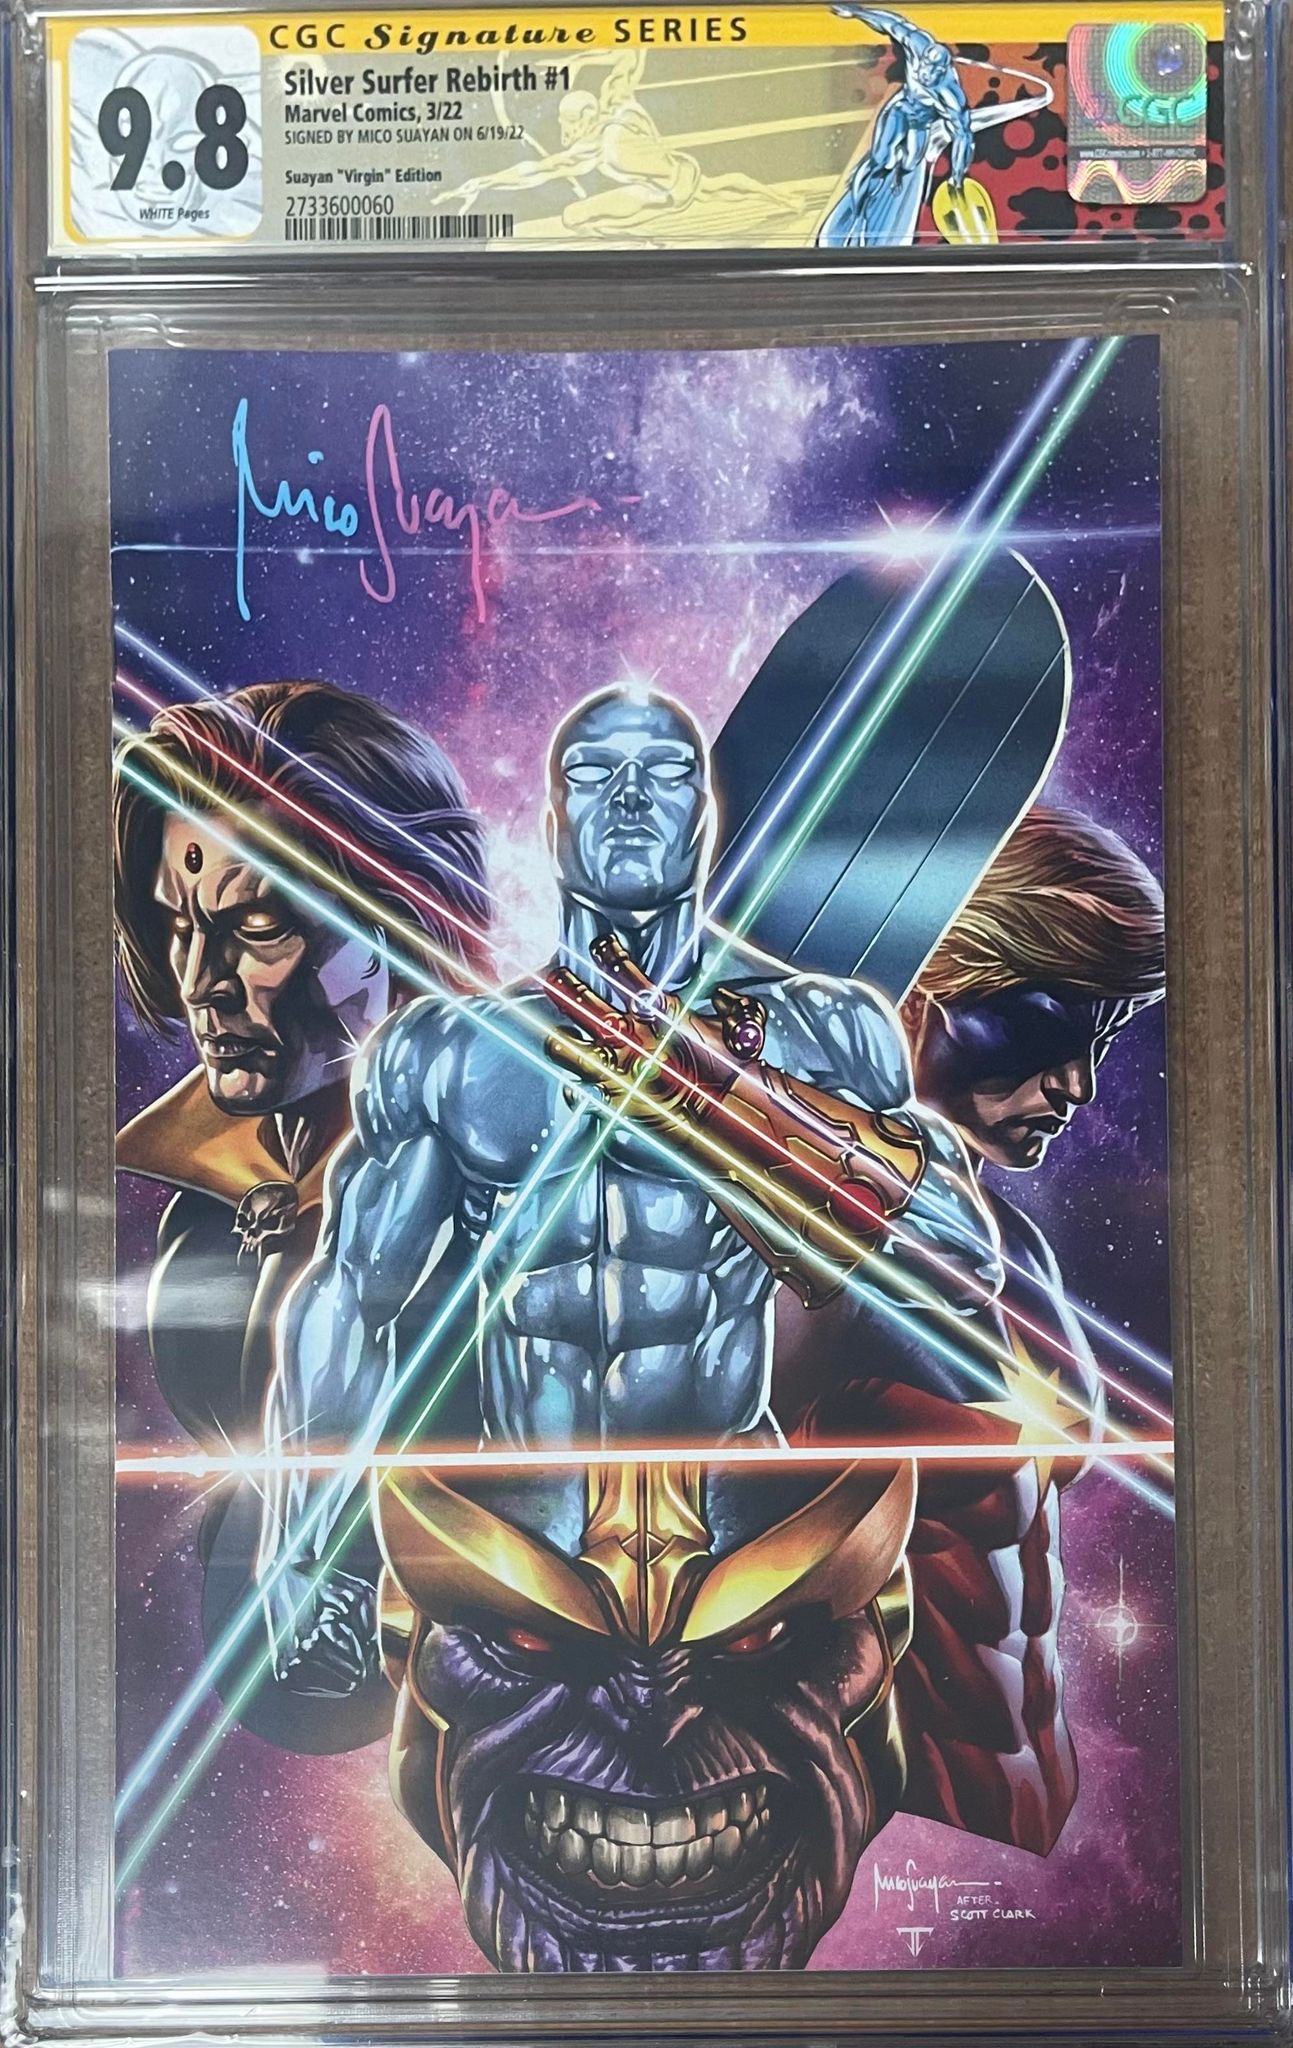 SILVER SURFER REBIRTH #1 EXCLUSIVE VIRGIN VARIANT SIGNED BY MICO SUAYAN W/RETIRED SILVER SURFER CUSTOM LABEL CGC 9.6 or BETTER